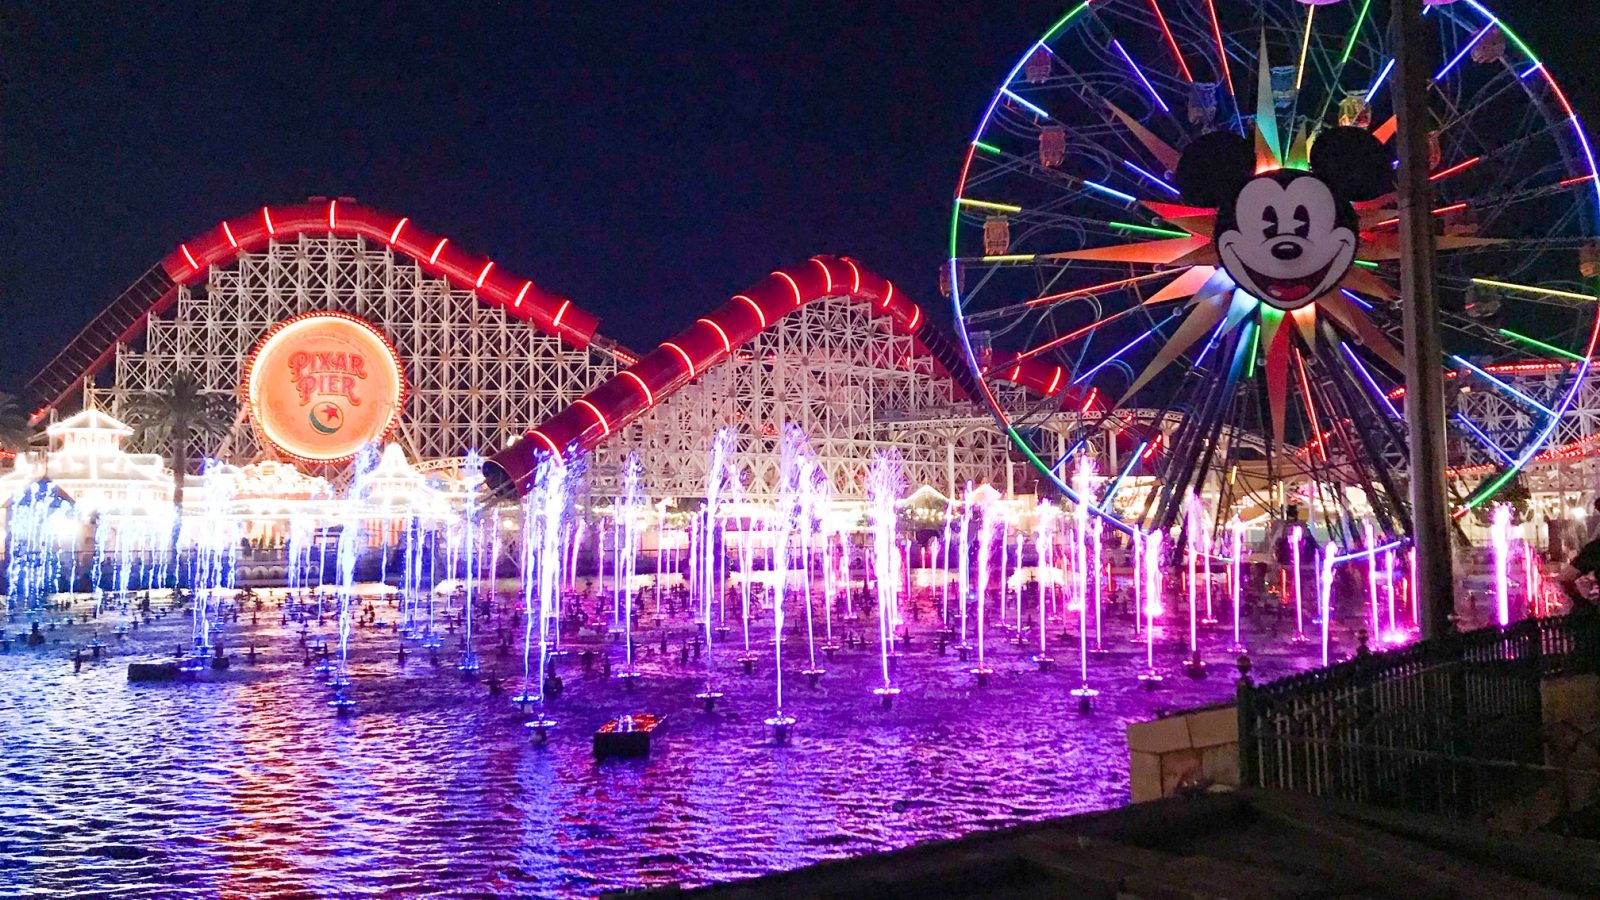 Watch World of Colour for things to do in Disneyland